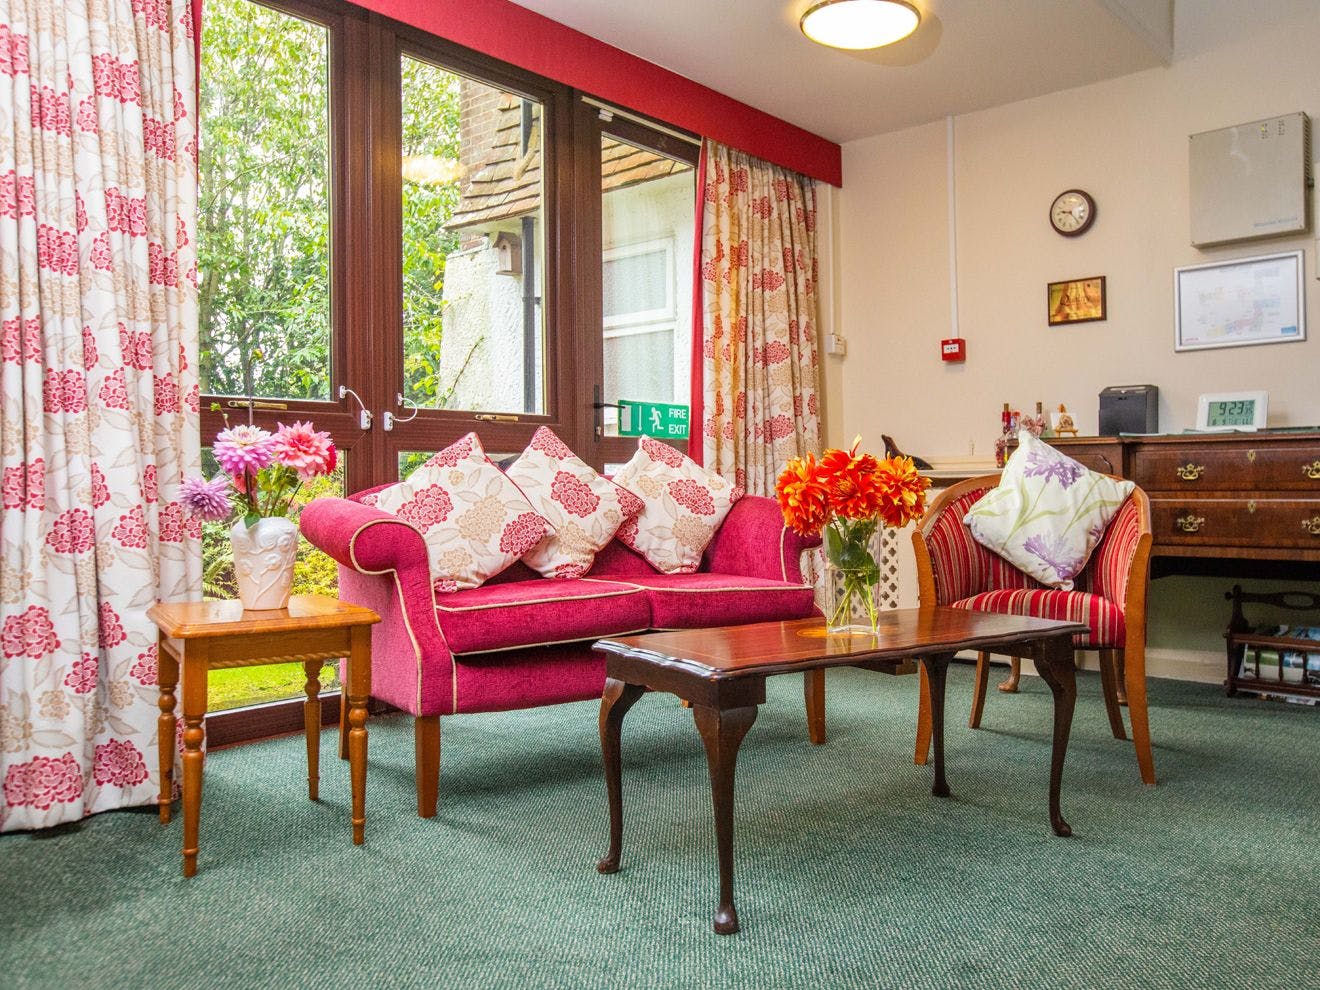 Redcot Care Home in Haslemere 5